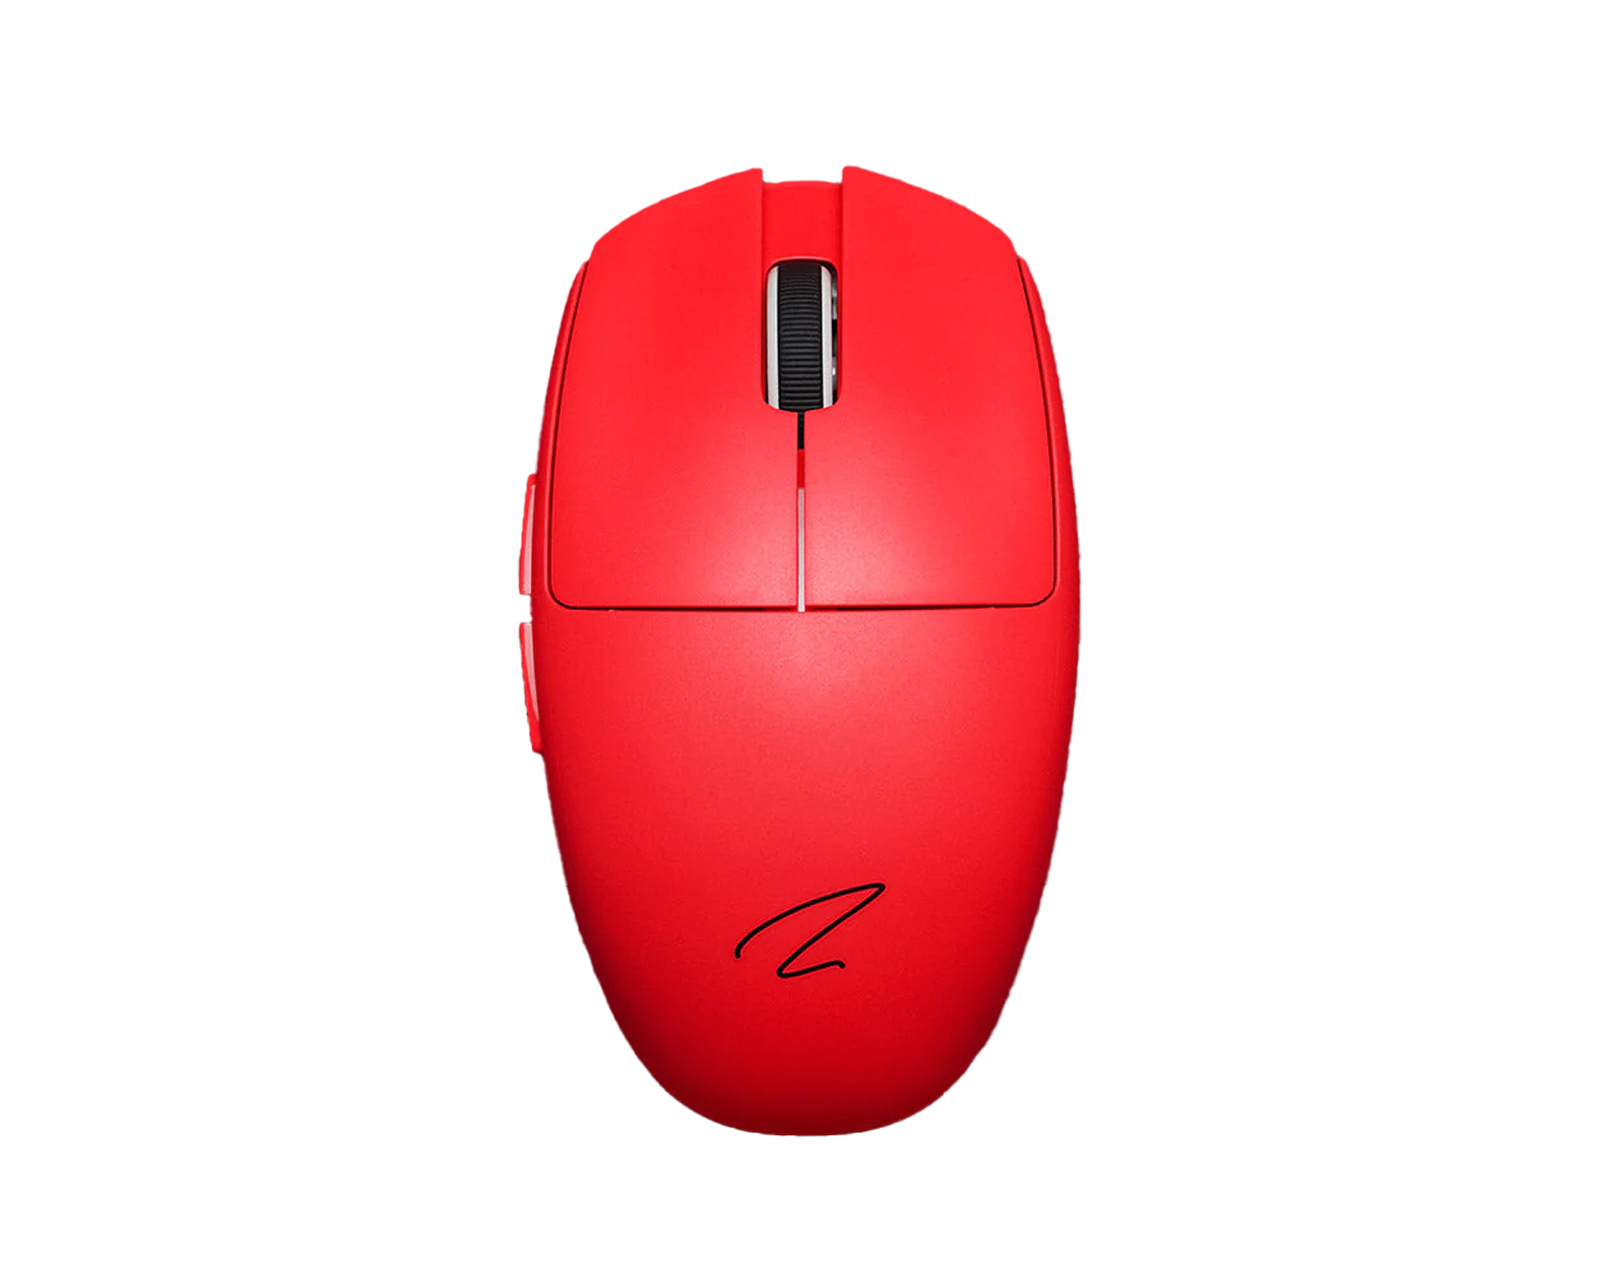 Zaopin Z1 PRO Wireless Gaming Mouse - Red - us.MaxGaming.com